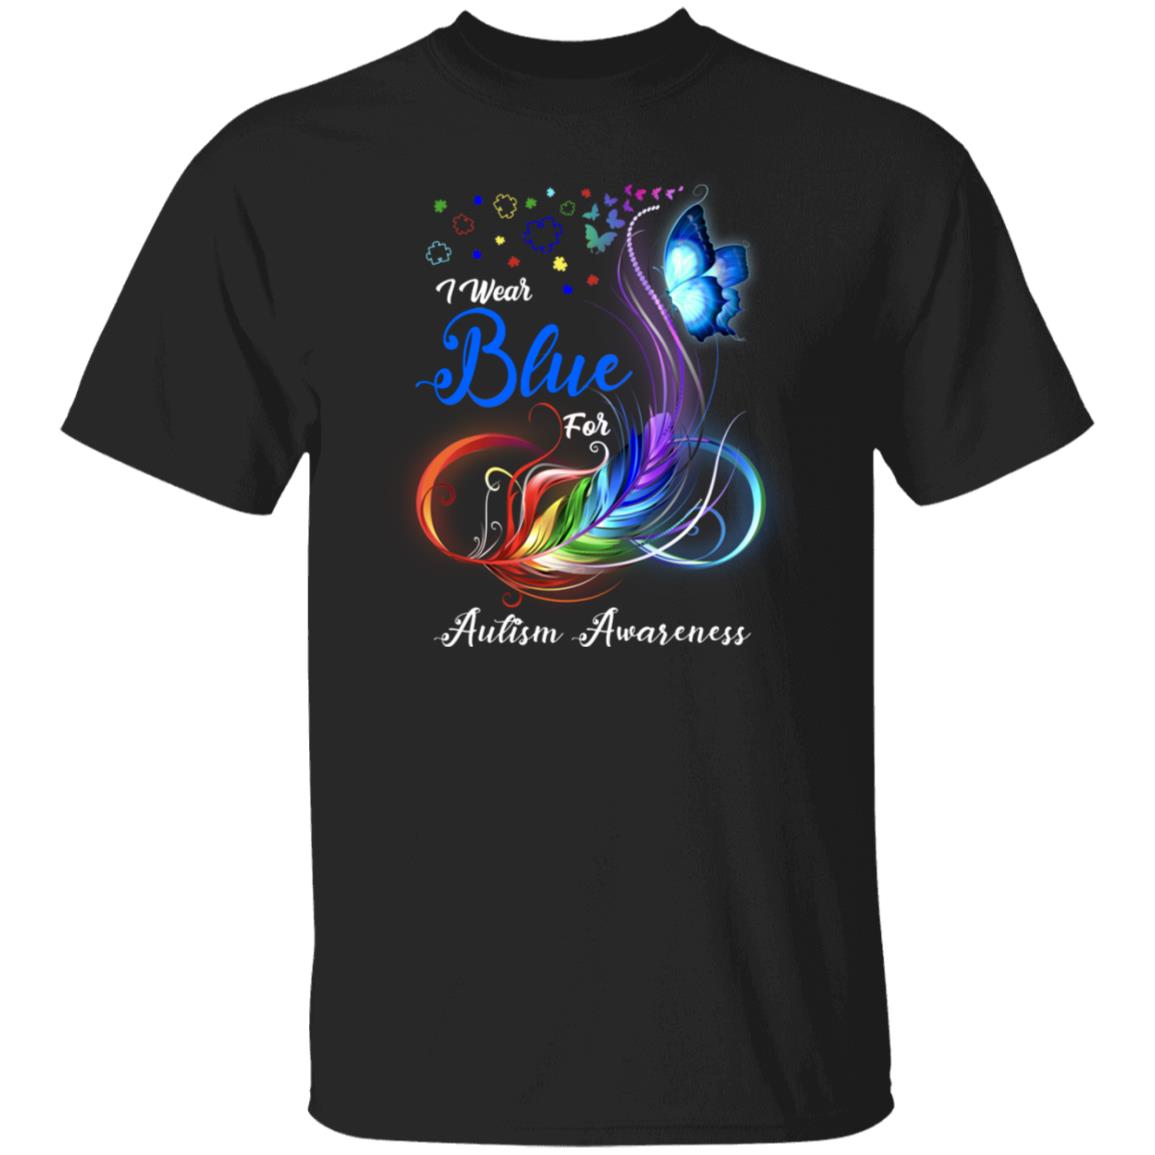 I Wear Blue for Autism Awareness Gift Shirt